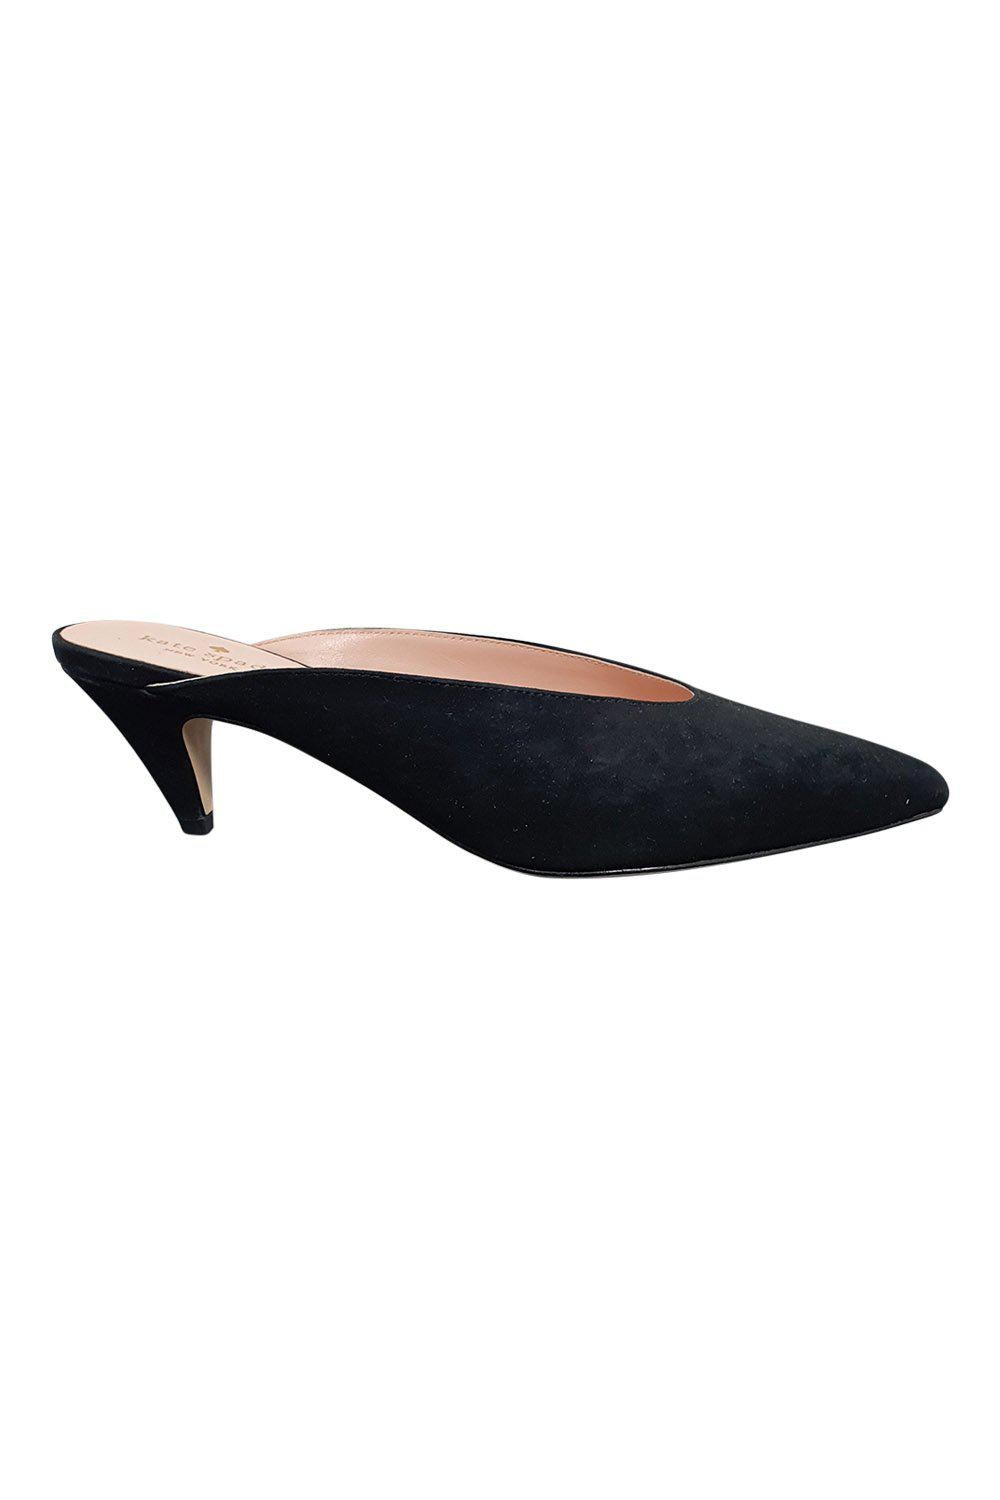 KATE SPADE New York Black Suede Sherrie Pointed Toe Court Heels (EU 38.5 | US 8.5 | UK 5.5)-The Freperie